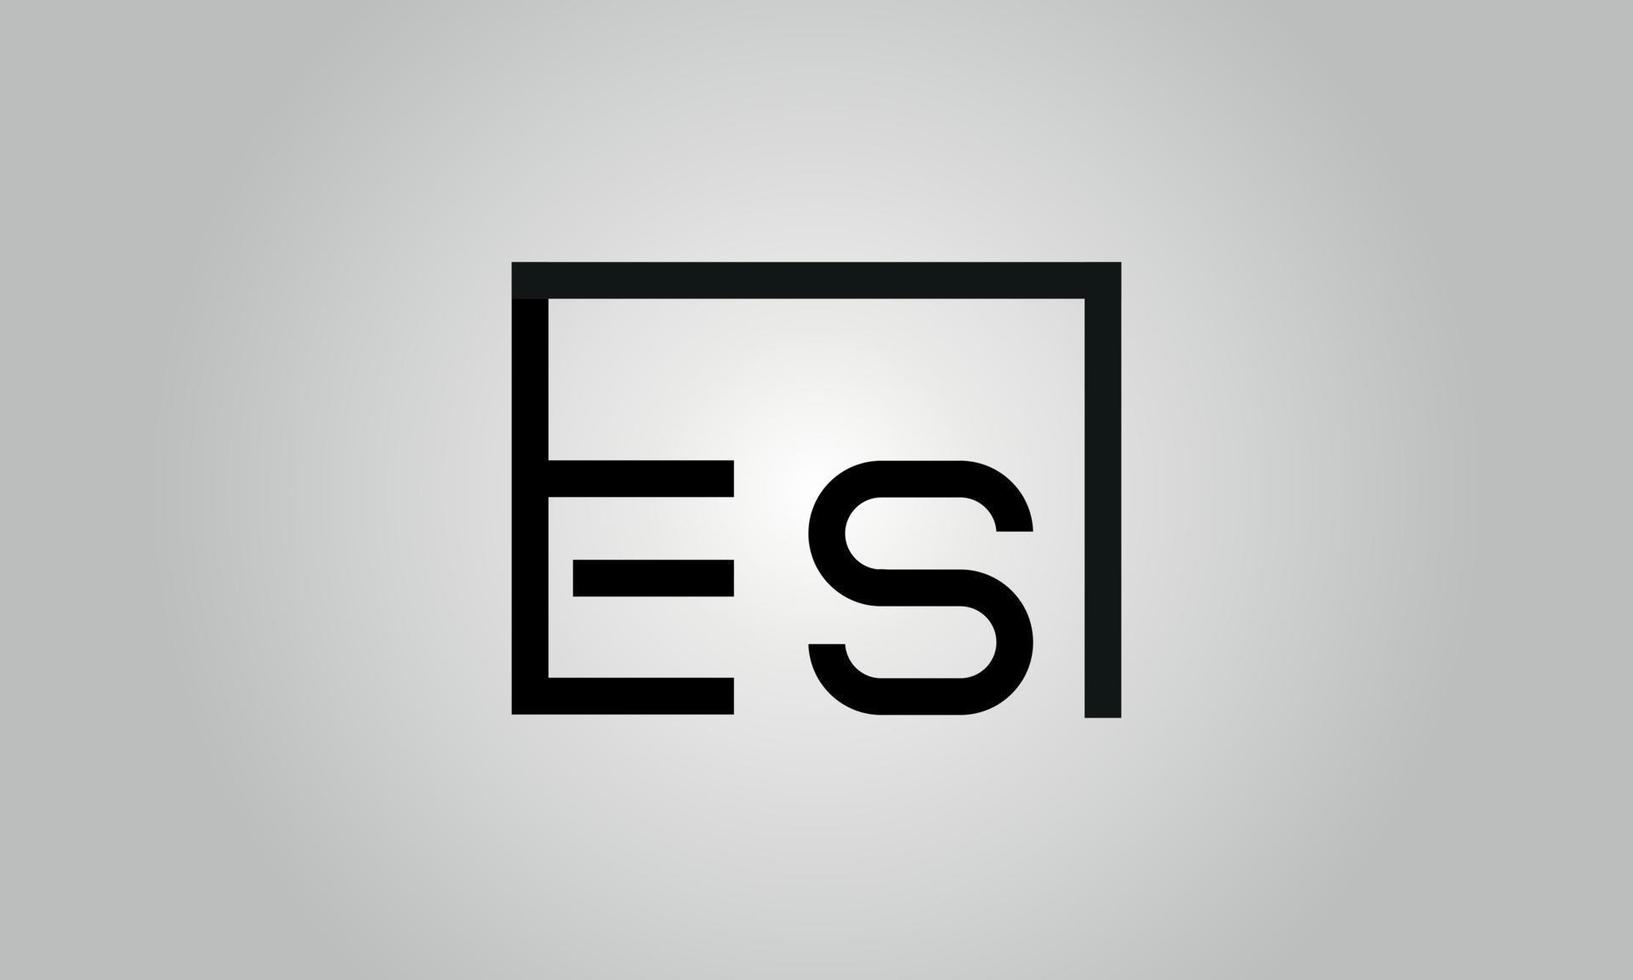 Letter ES logo design. ES logo with square shape in black colors vector free vector template.